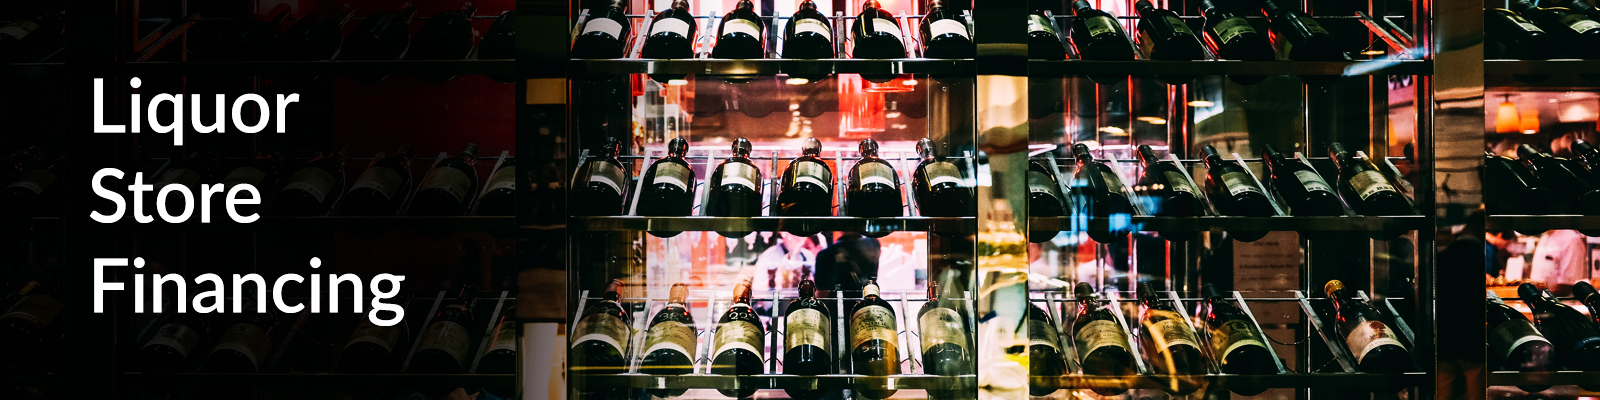 Liquor Store Financing For Business Growth